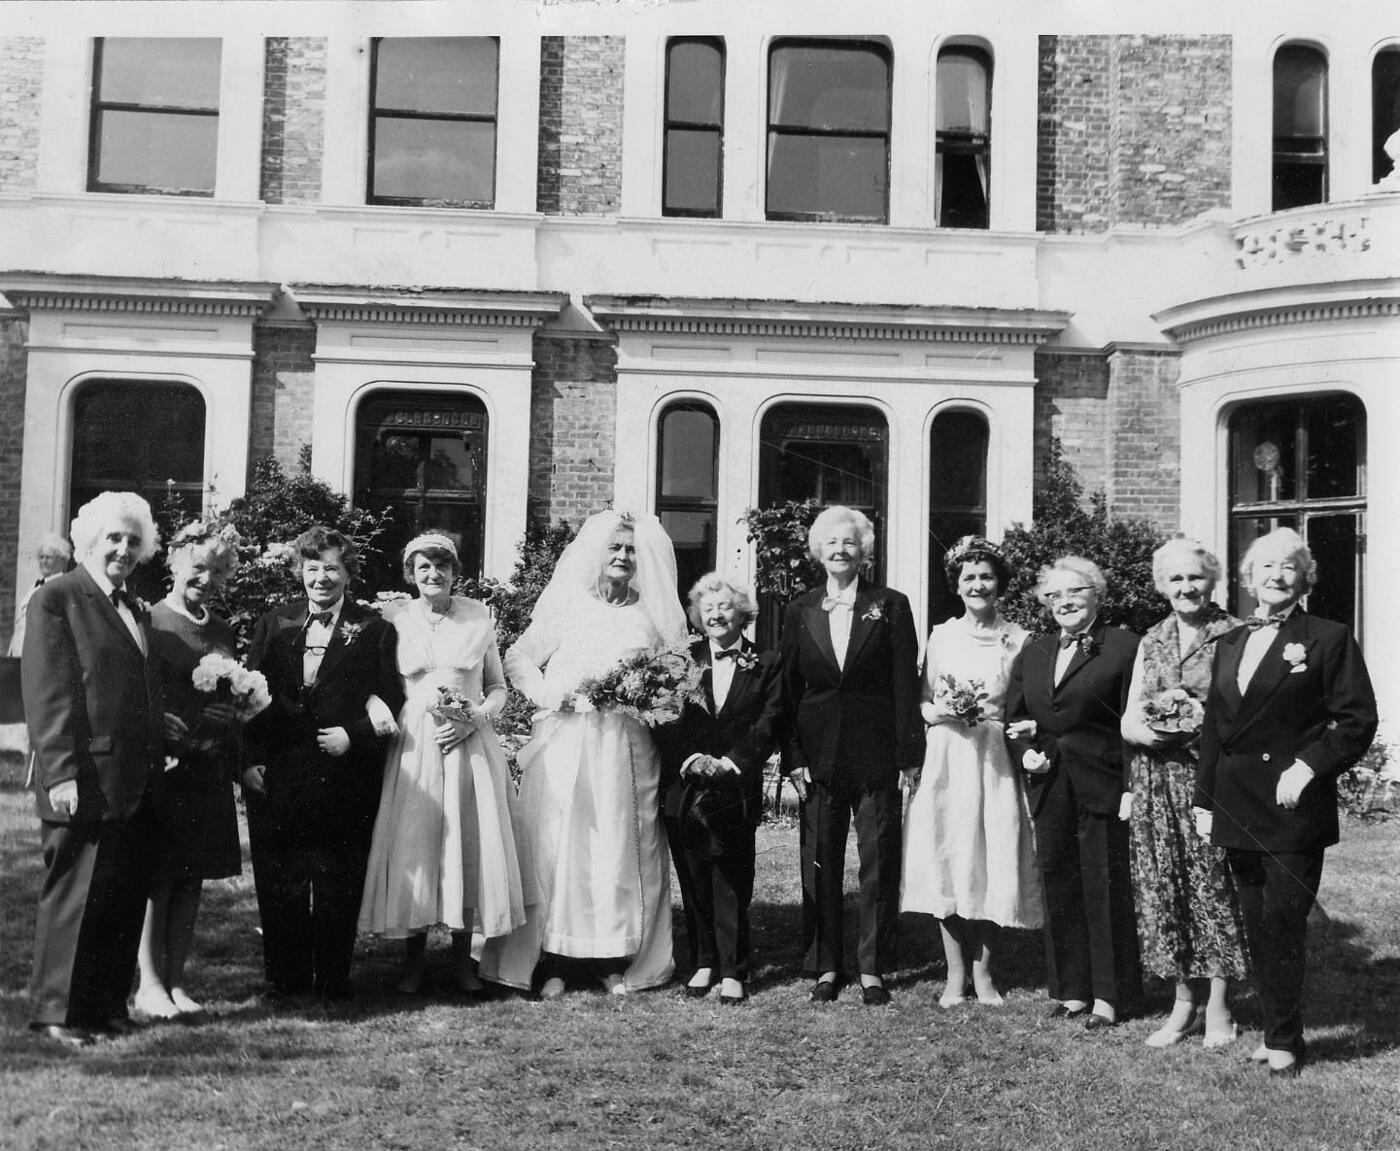 A wedding group photographed on the lawn at the Streatham Derby and Joan Club.